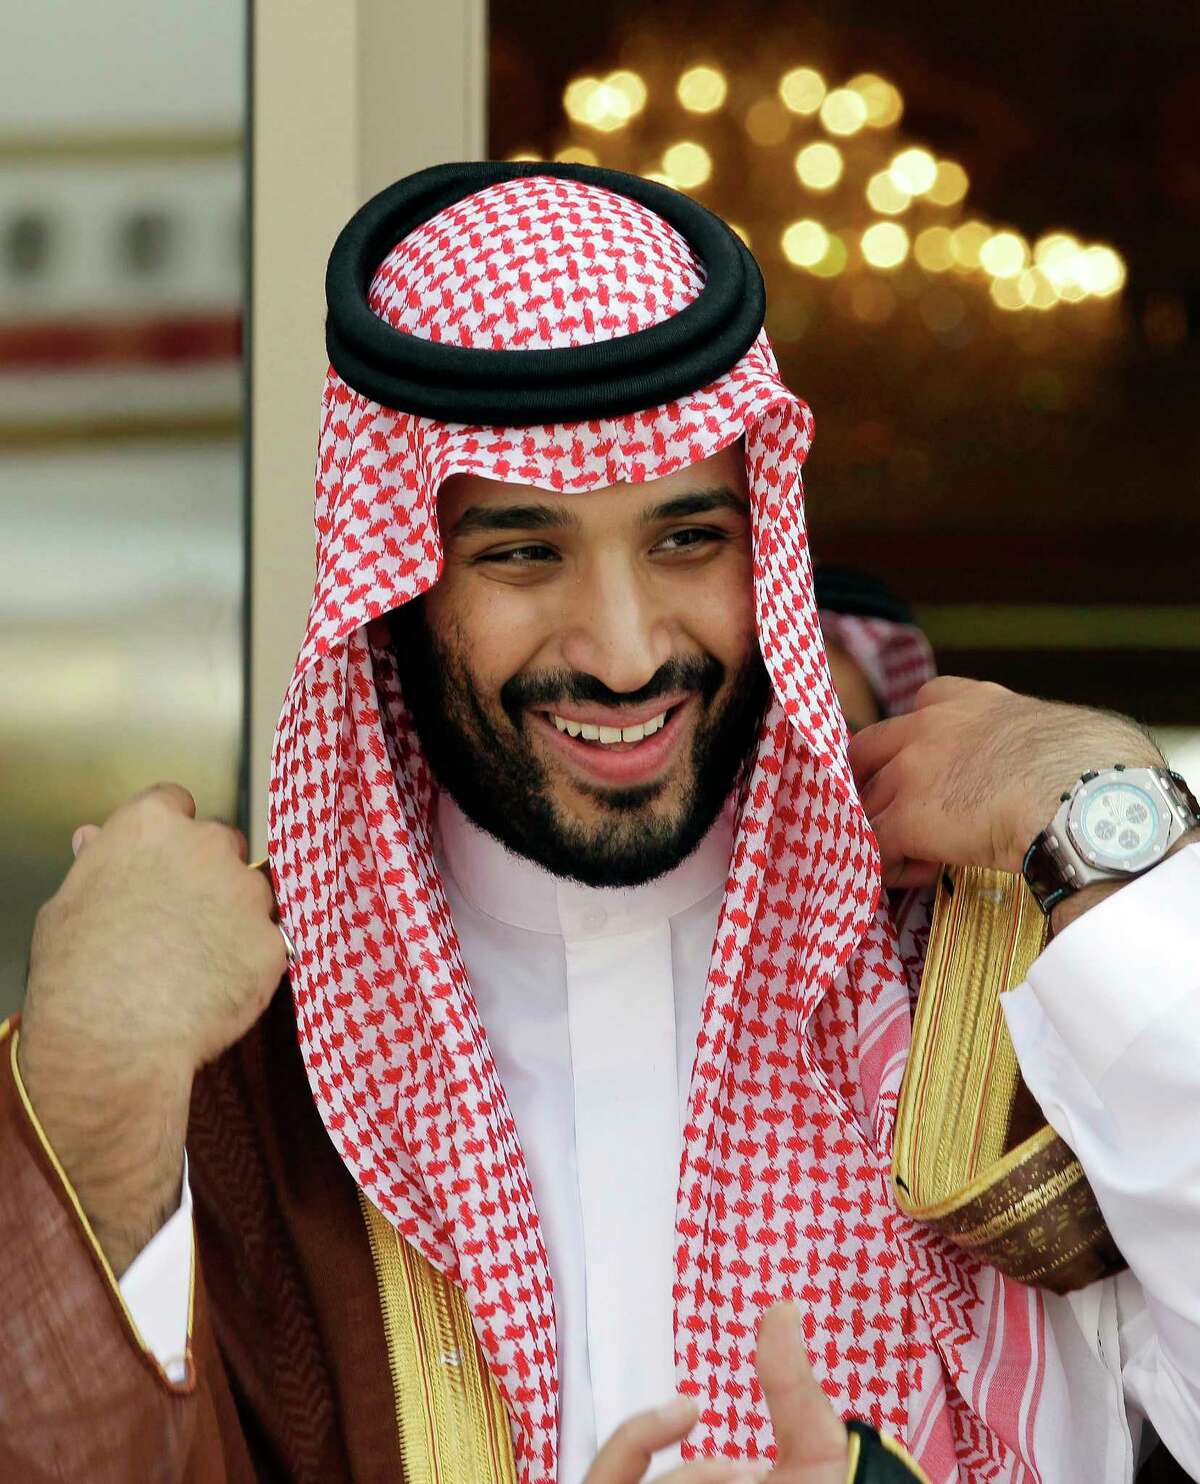 FILE - In this May 14, 2012 file photo, Prince Mohammed bin Salman waits for Gulf Arab leaders ahead of the opening of Gulf Cooperation Council summit, in Riyadh, Saudi Arabia.Saudi Arabia's King Salman has appointed his 31-year-old son Mohammed bin Salman as crown prince, removing the country's counterterrorism czar and a figure well-known to Washington from the royal line of succession. In a series of royal decrees issued Wednesday, June 21, 2017 and carried on the state-run Saudi Press Agency, the monarch stripped Prince Mohammed bin Nayef, who was first in line to the throne, from his title as crown prince and from his post as the country's powerful interior minister overseeing security. (AP Photo/Hassan Ammar, File)